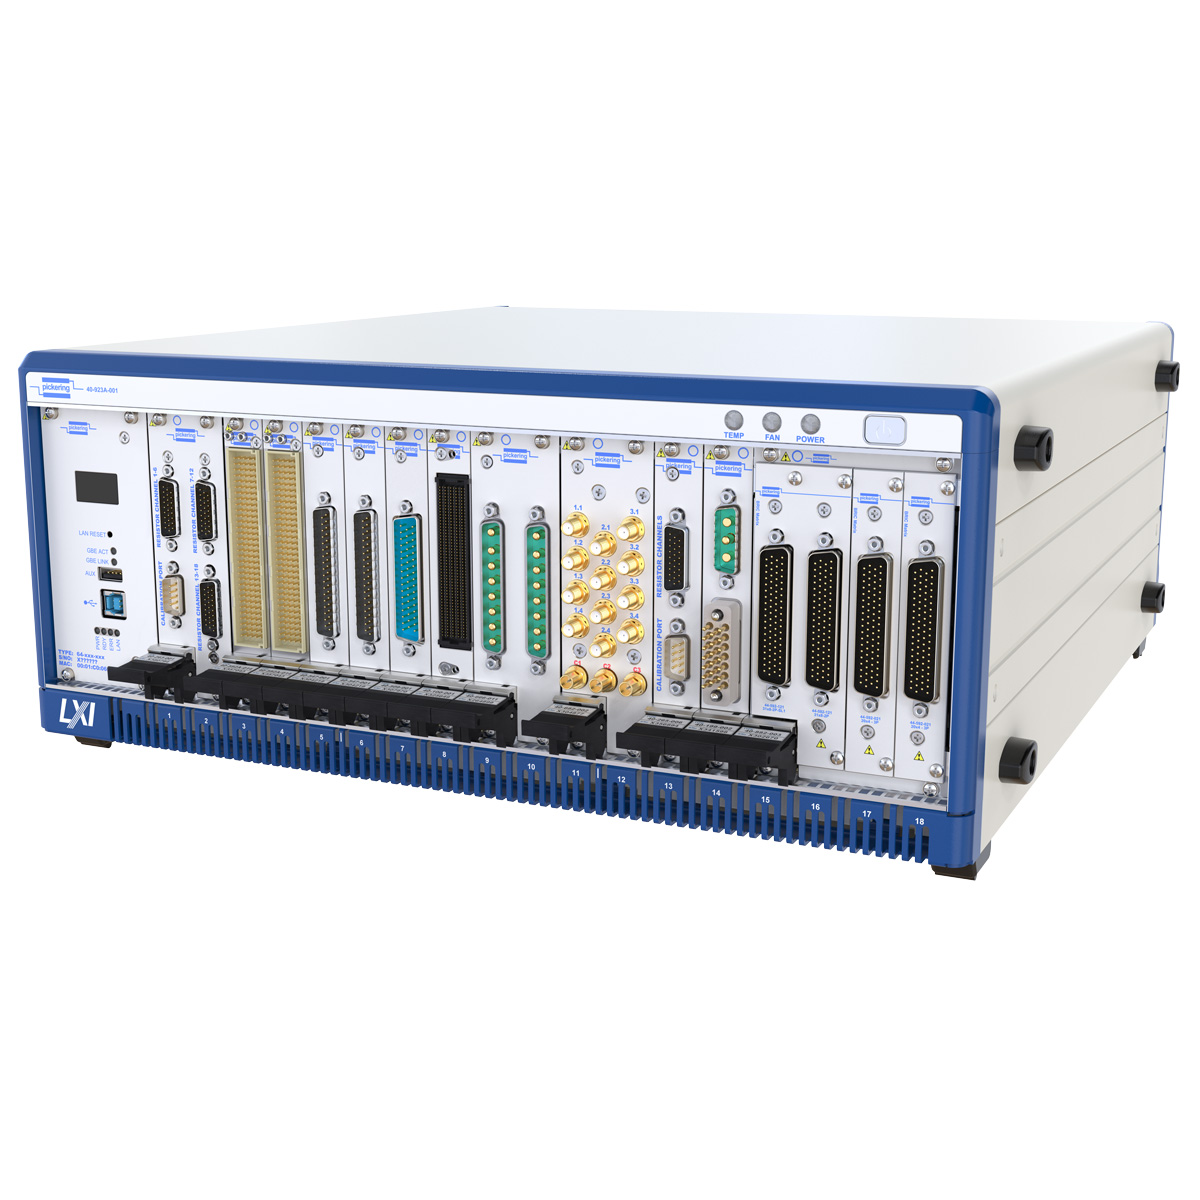 60-103D-001 18-Slot Modular LXI/USB Chassis with Cards